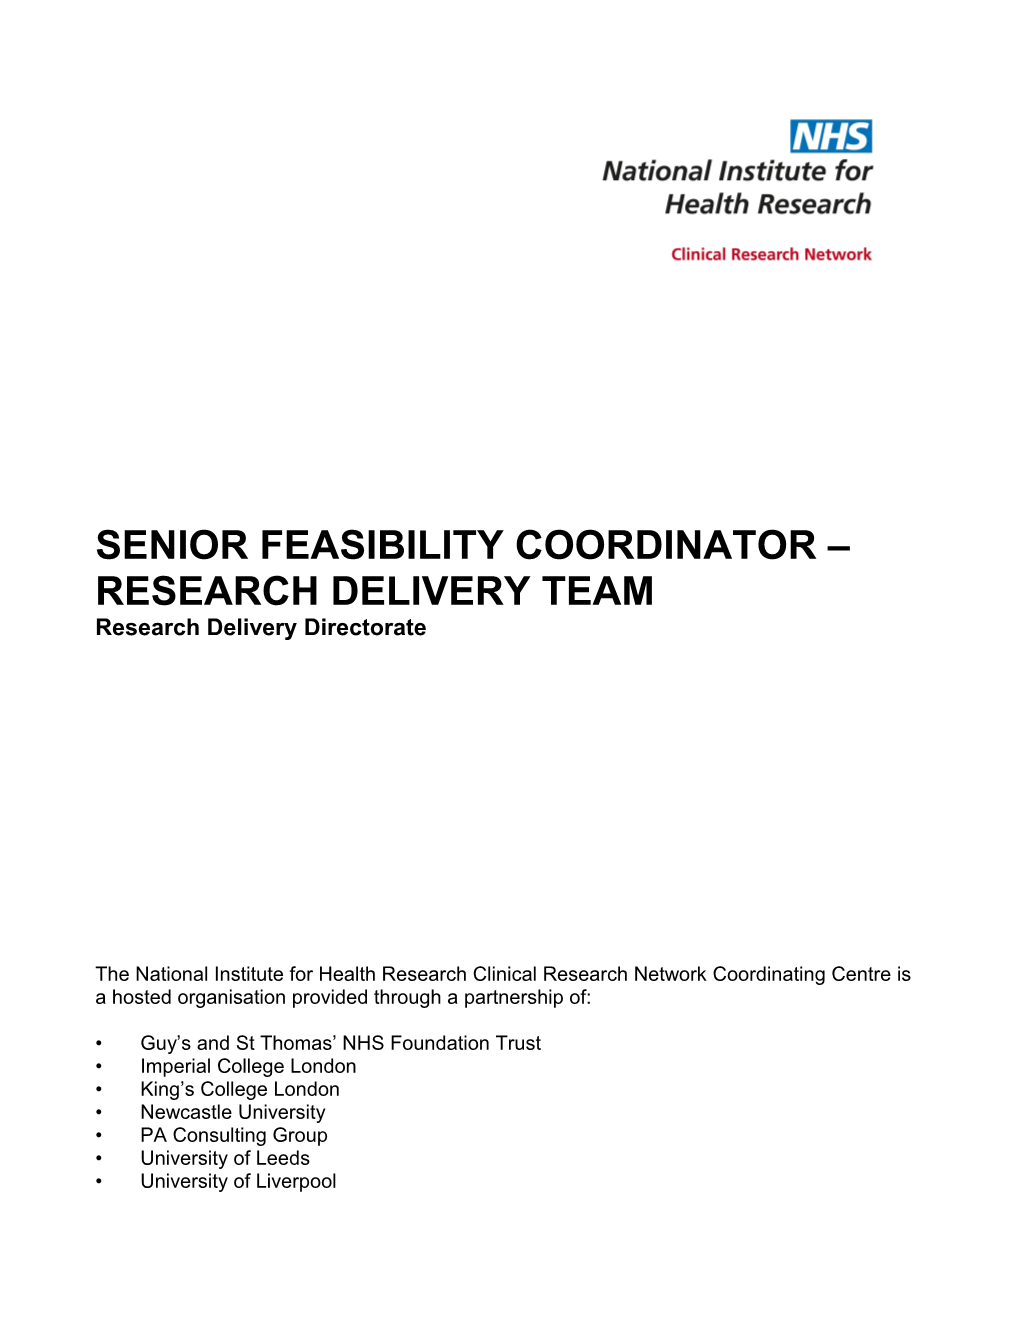 Senior Feasibility Coordinator Research Delivery Team